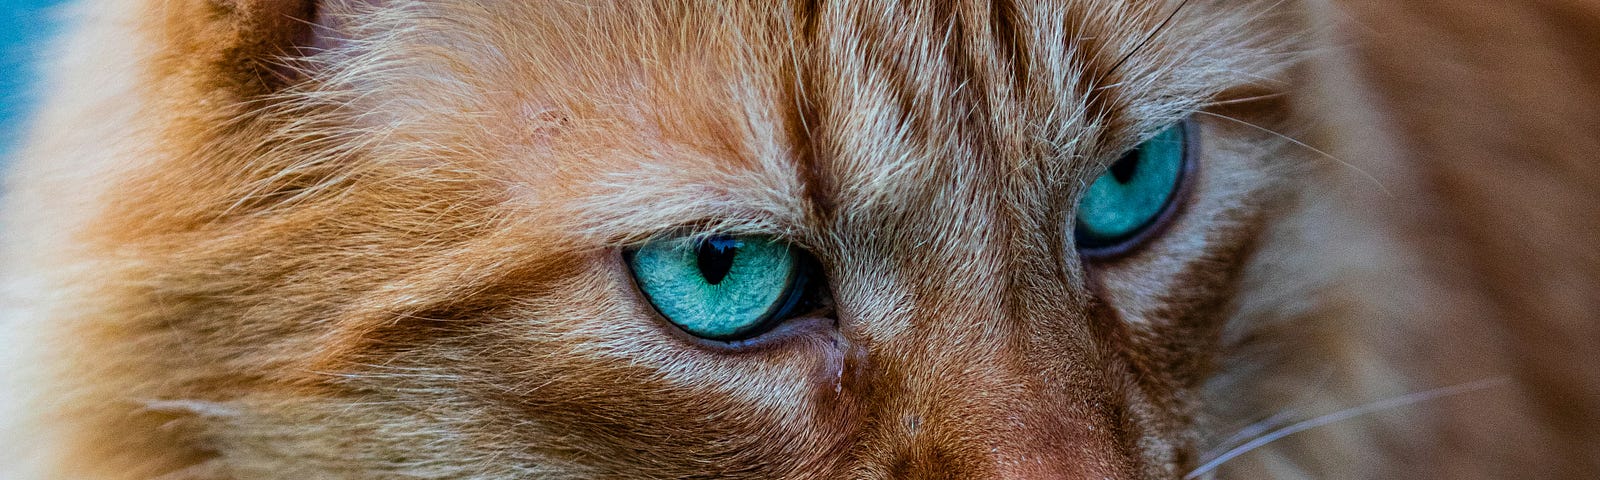 Photo of a yellow cat with blue eyes against a blue background